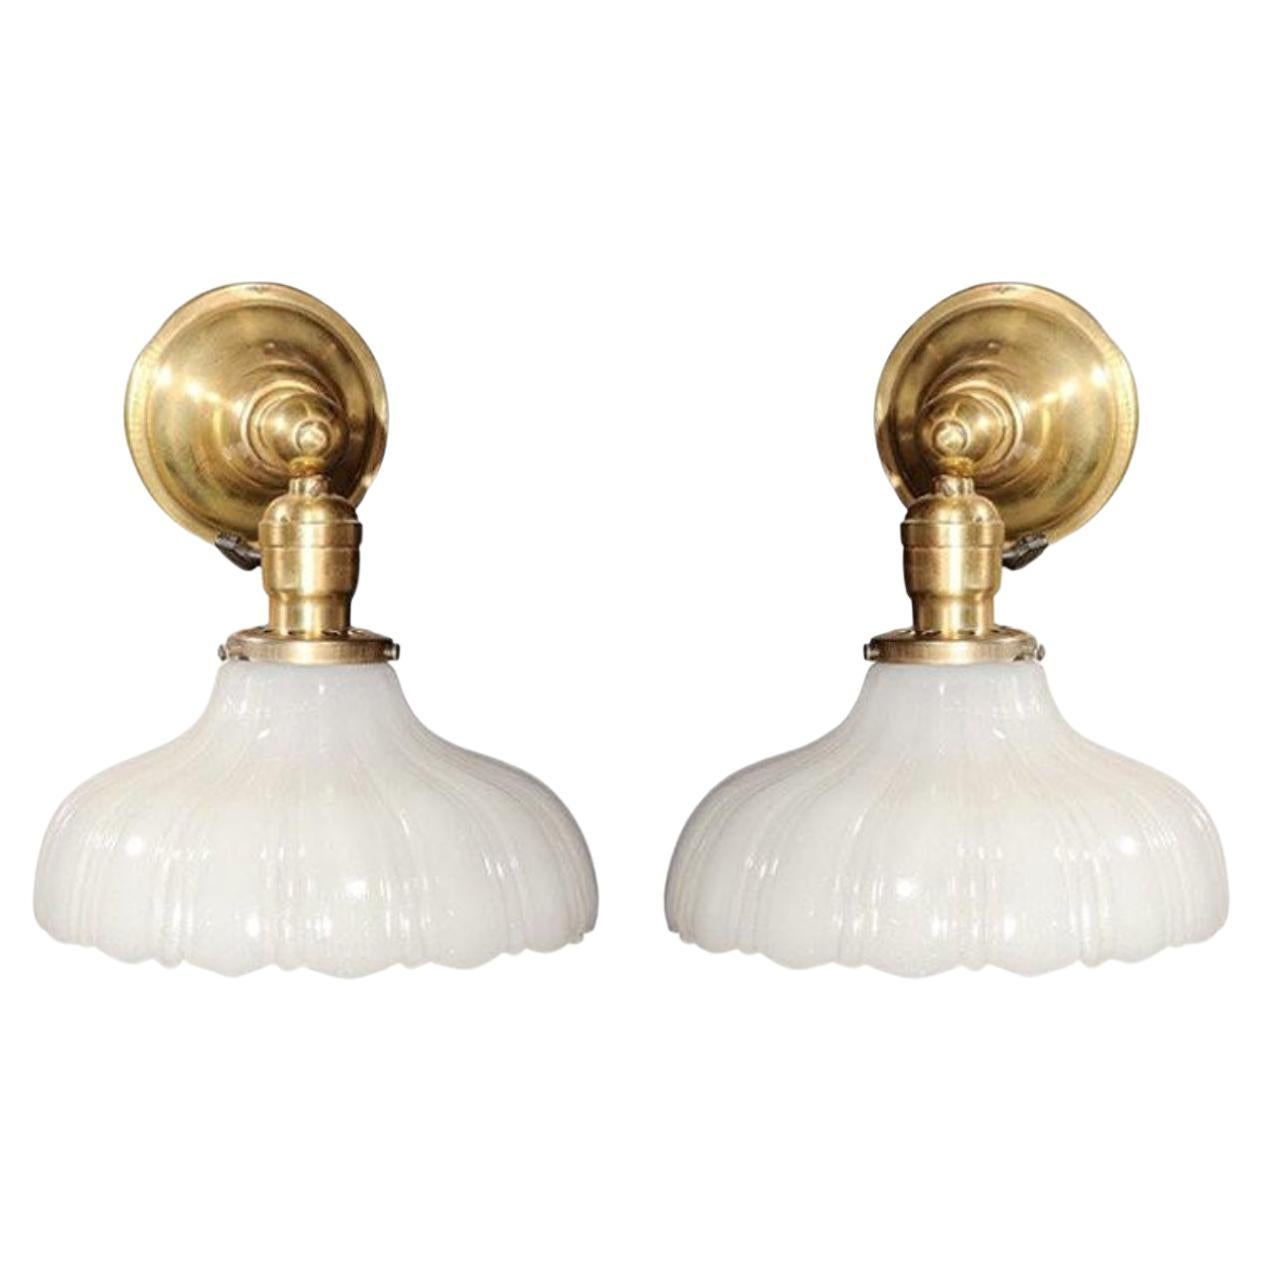 Pair of Vintage Scalloped Milk Glass & Brass Wall Sconces For Sale